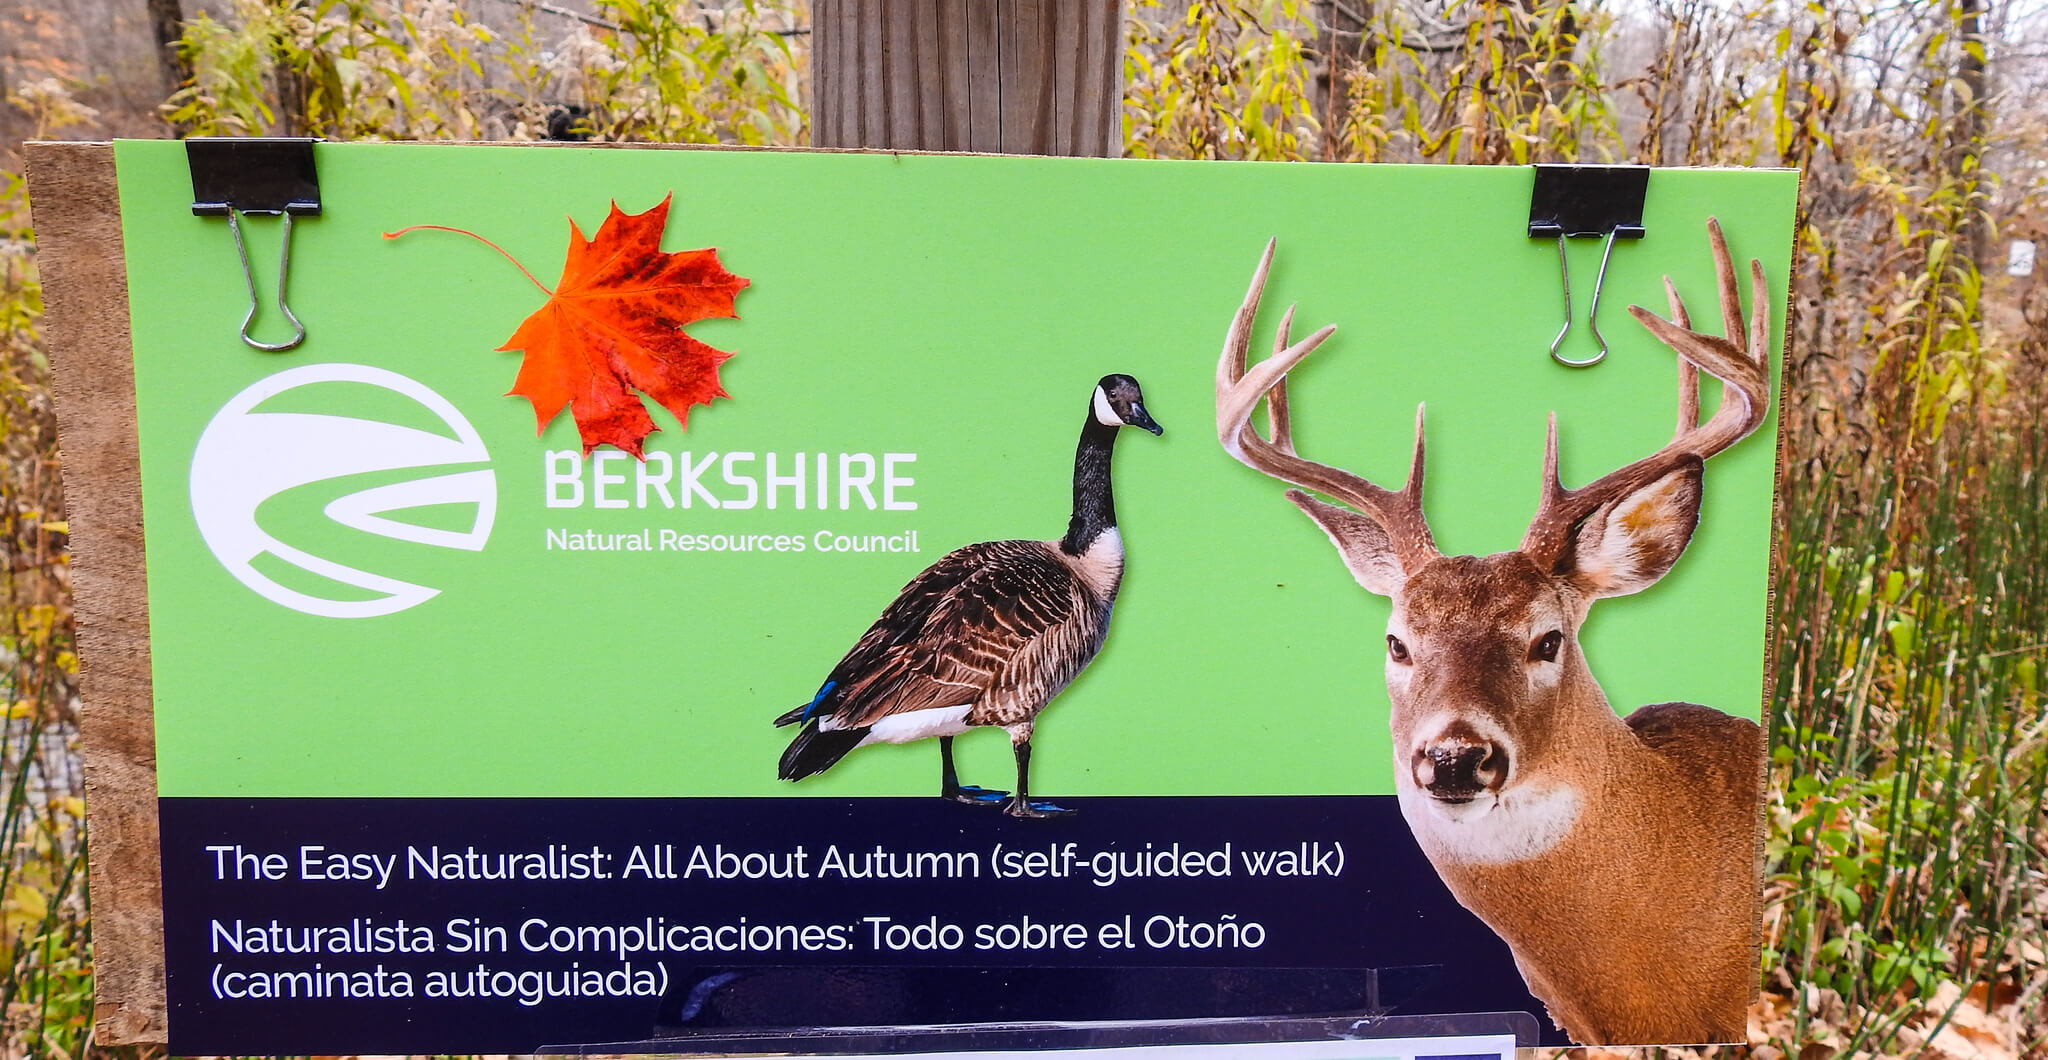 A Berkshire Natural Resources sign featuring a goose and deer invited people to take a hike through the woods.